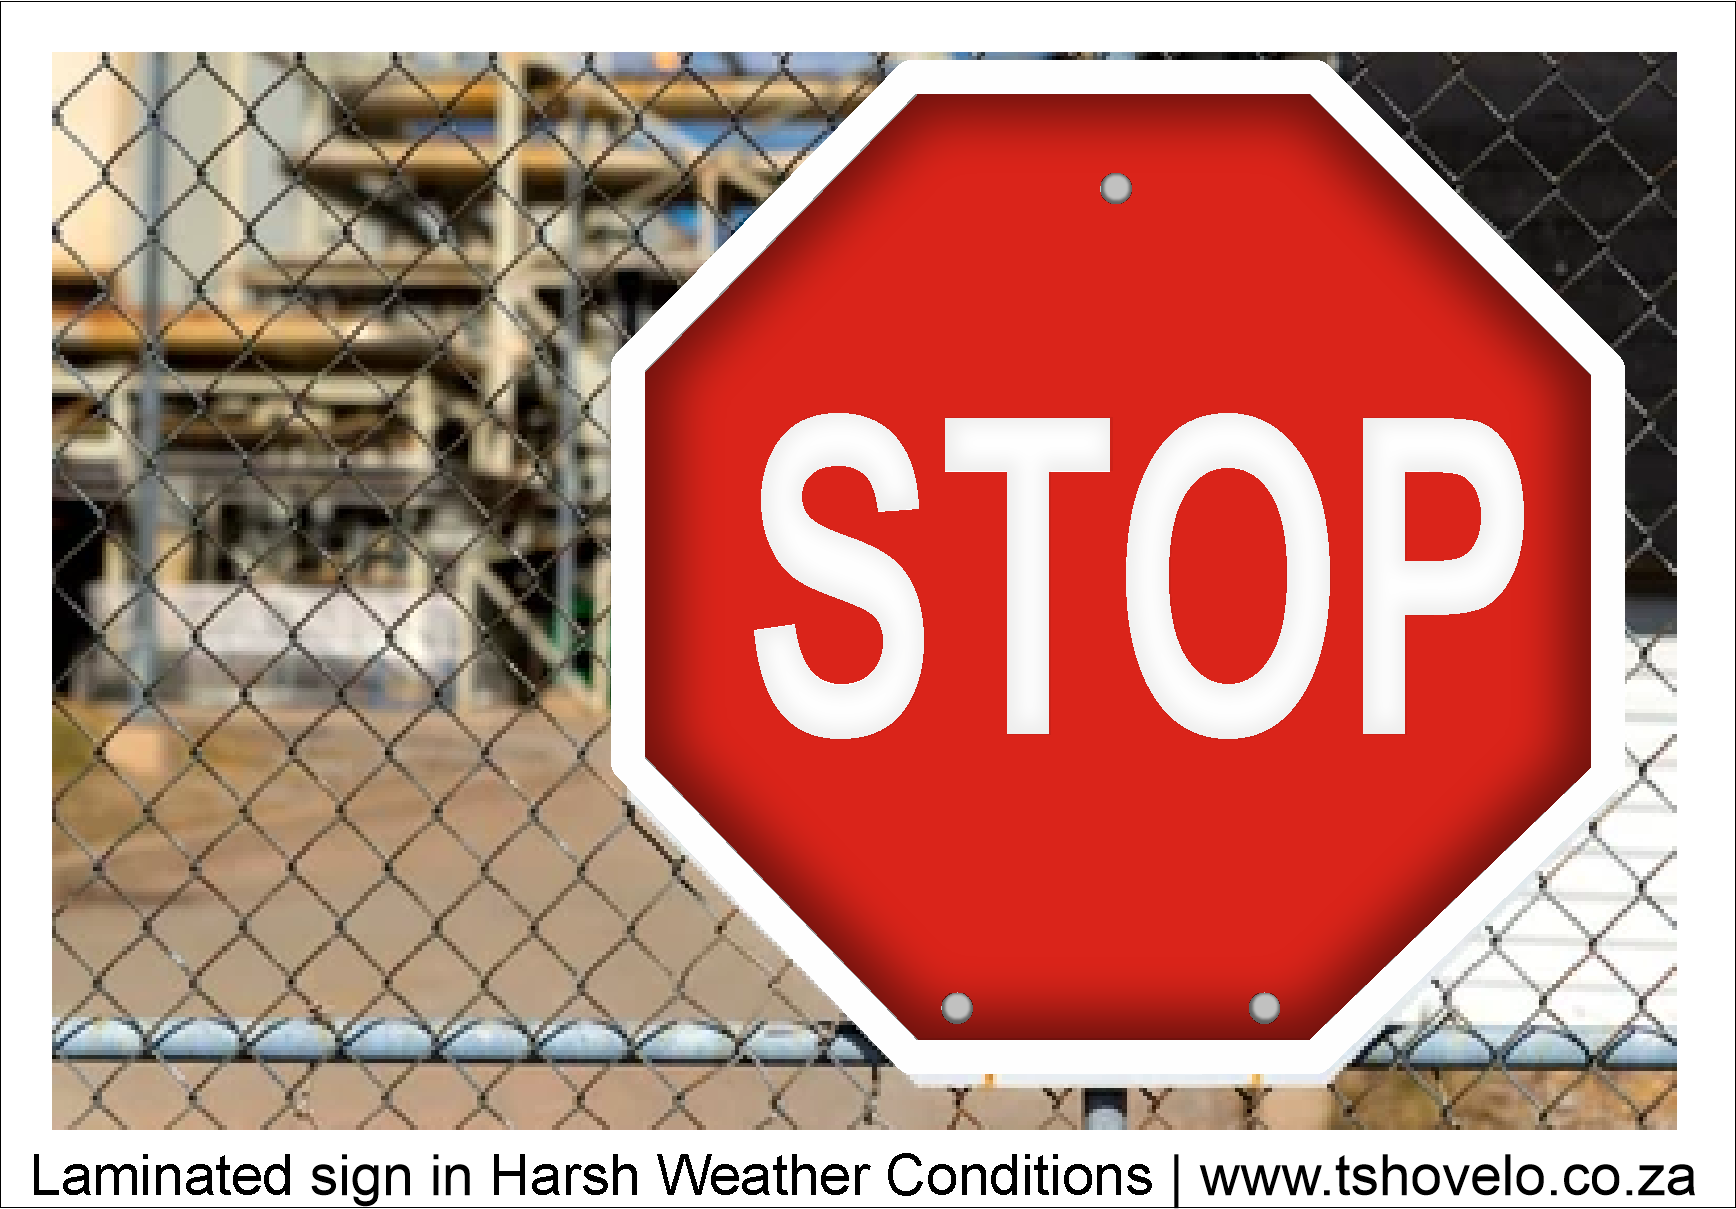 Laminated sign in harsh weather conditions